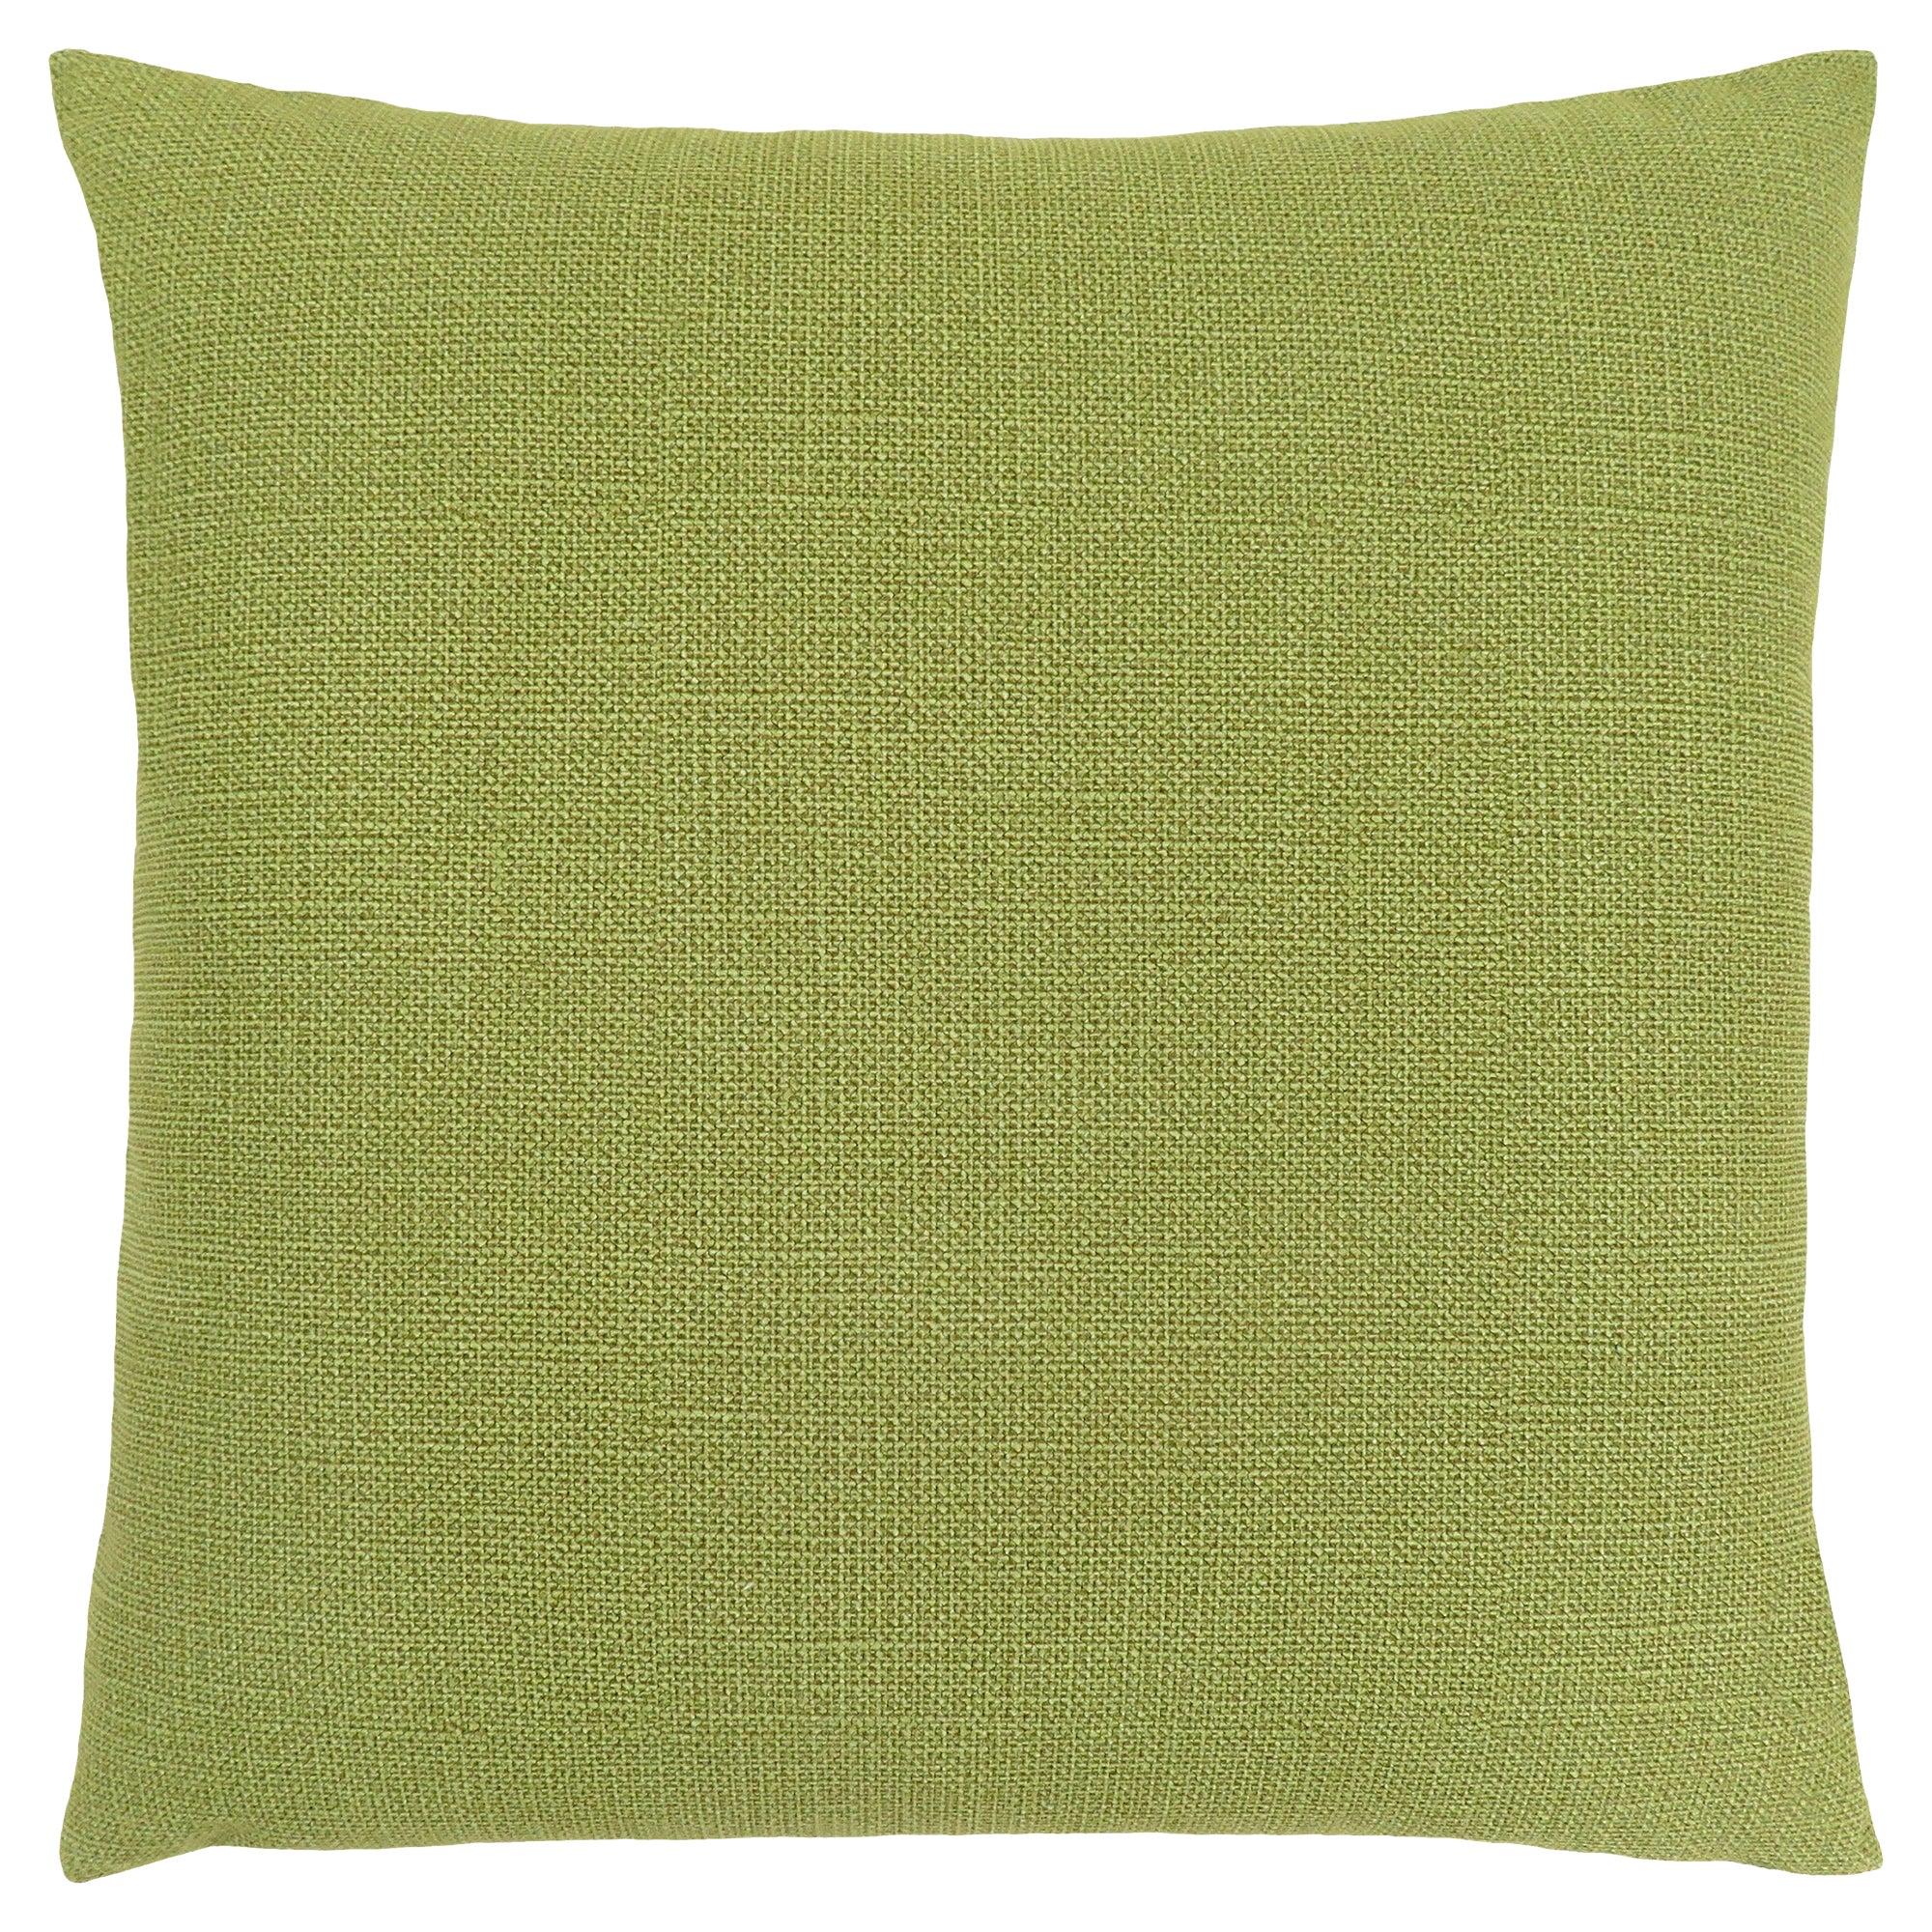 Pillow - 18X 18 / Patterned Lime Green / 1Pc